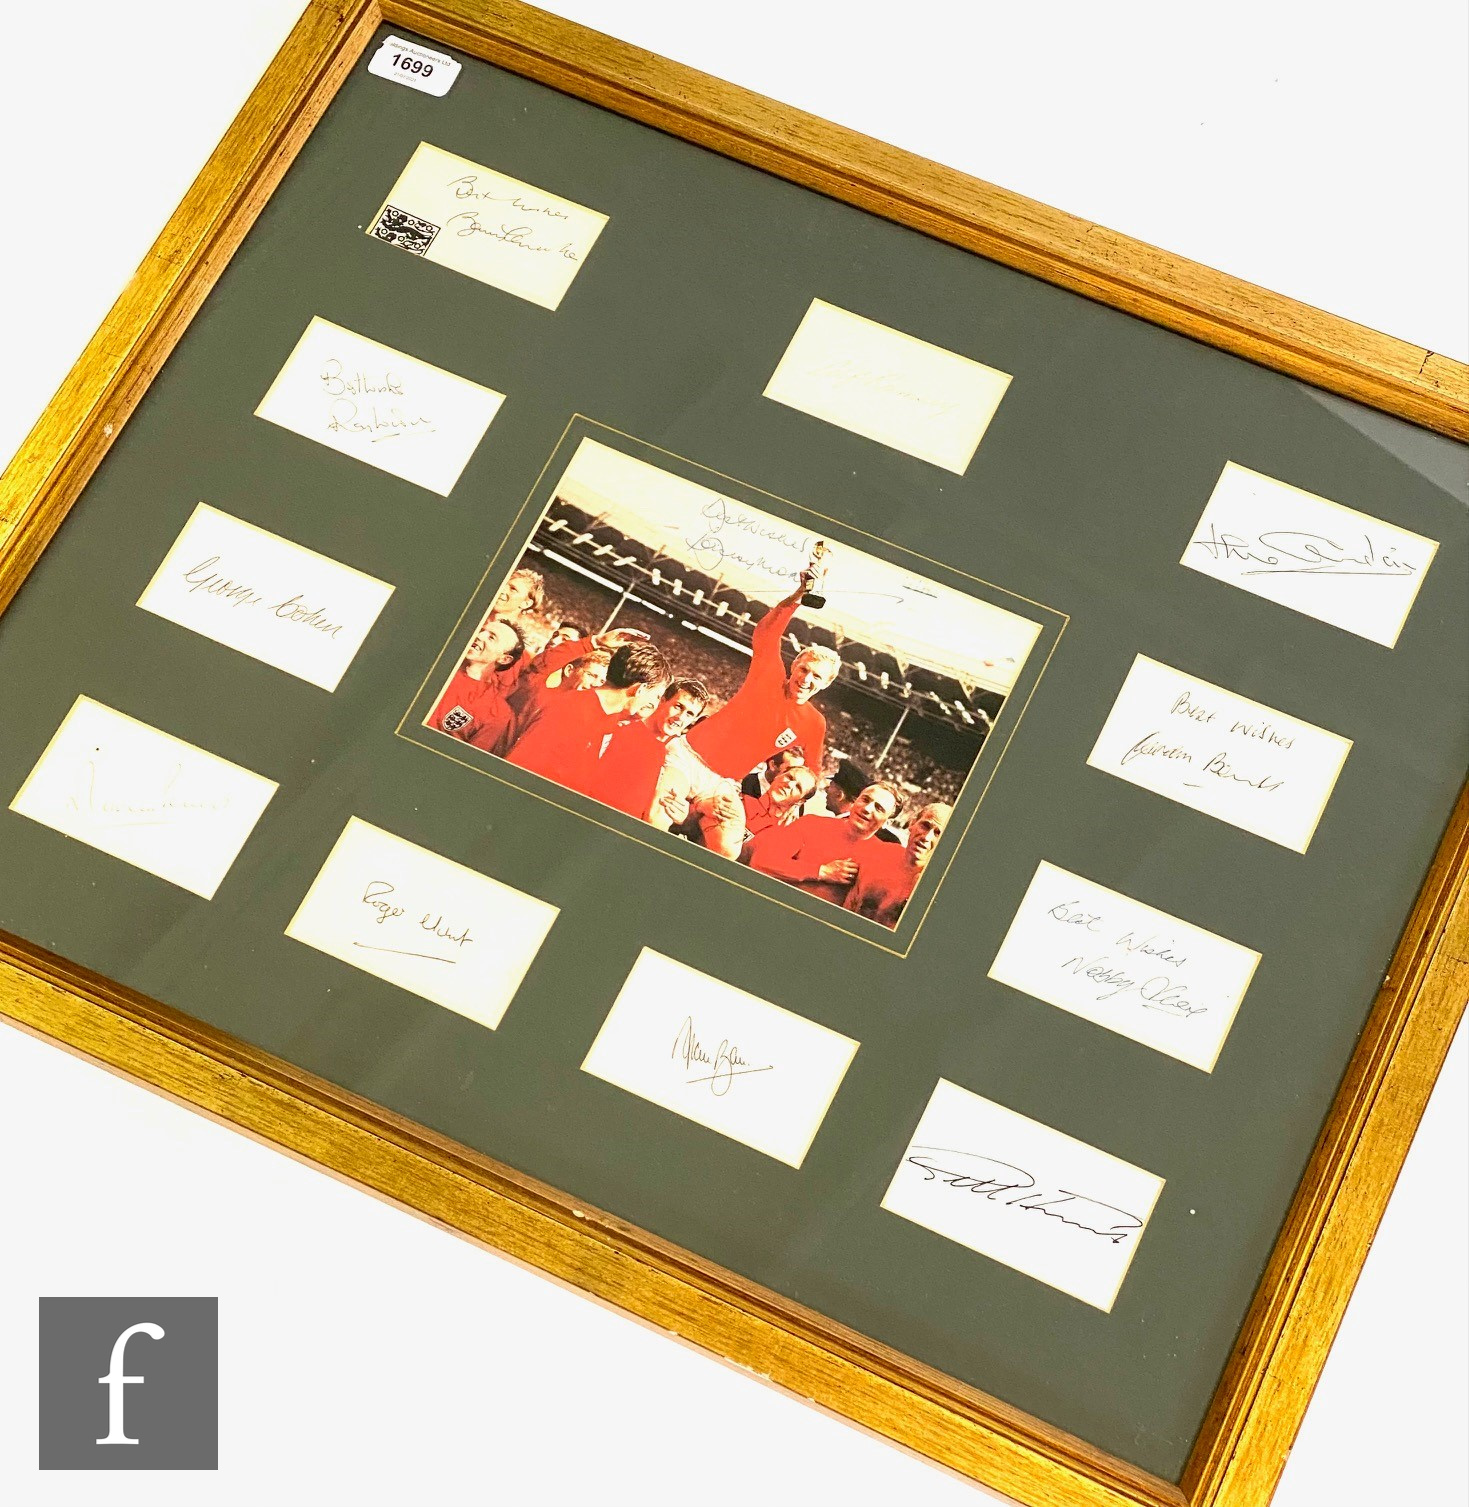 Eleven England 1966 World Cup winners team signatures including 'Alf Ramsey with Best wishes', Bobby